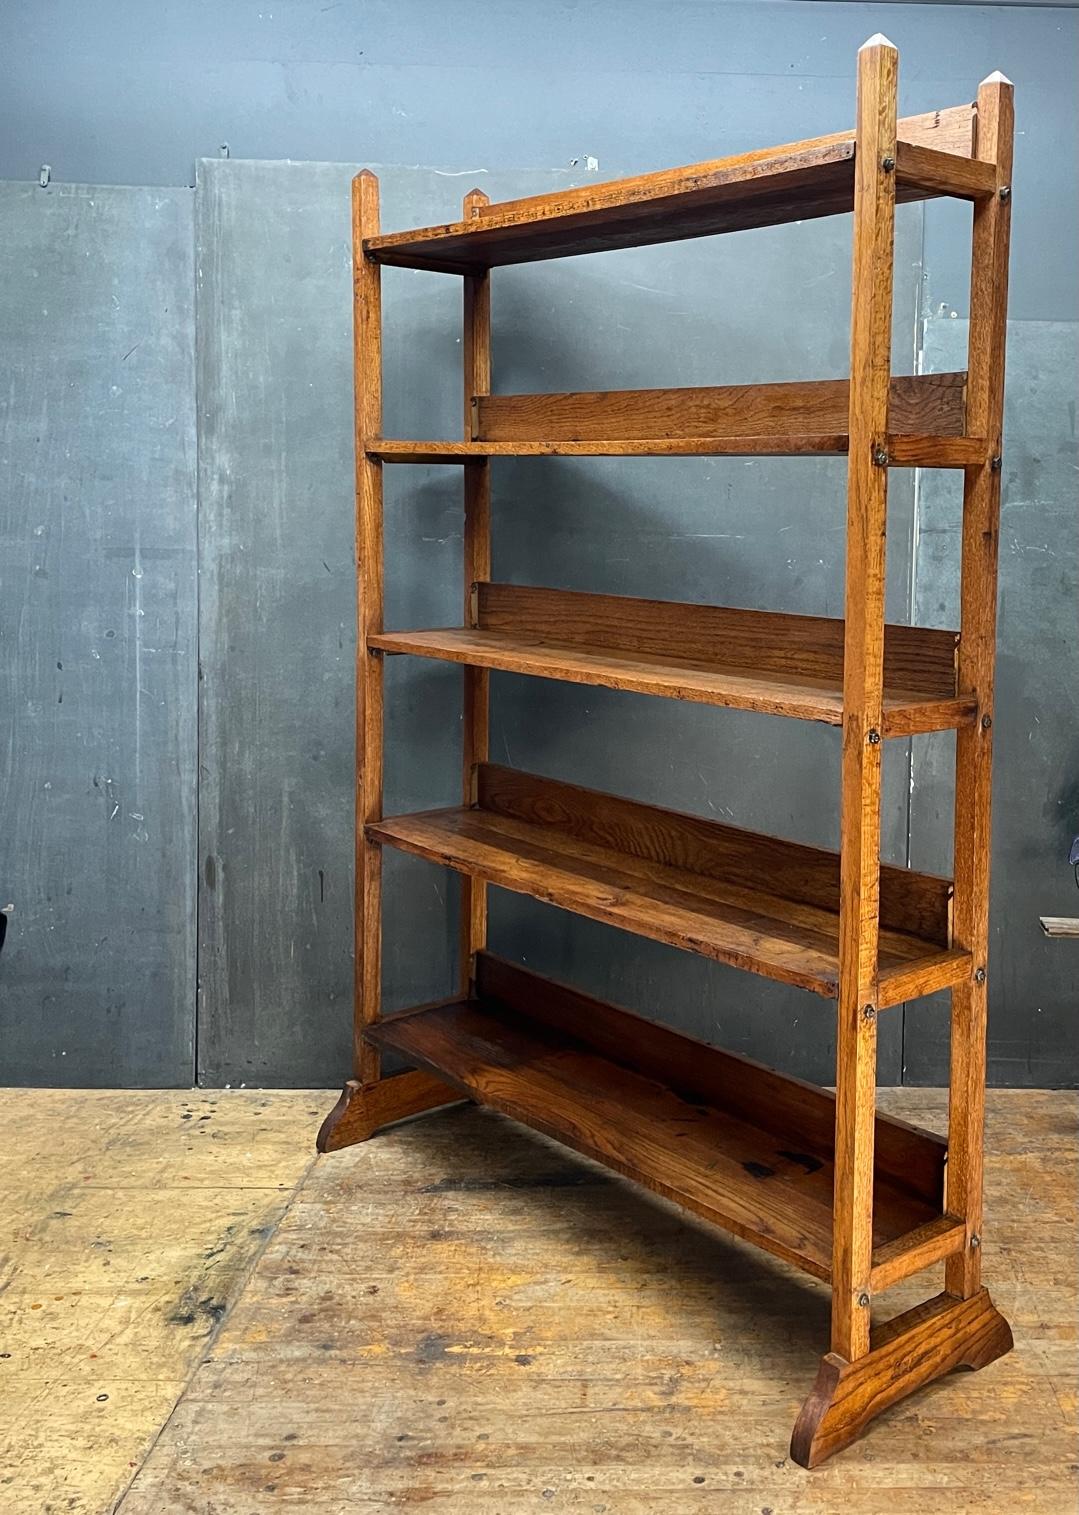 Beautifully Patinated piece of Stickley style mission era furniture. A large and wide modular solid Oak Bookcase or General Store Display. Sturdy and Usable as designed. Does disassemble. It is all constructed of solid oak with metal joint